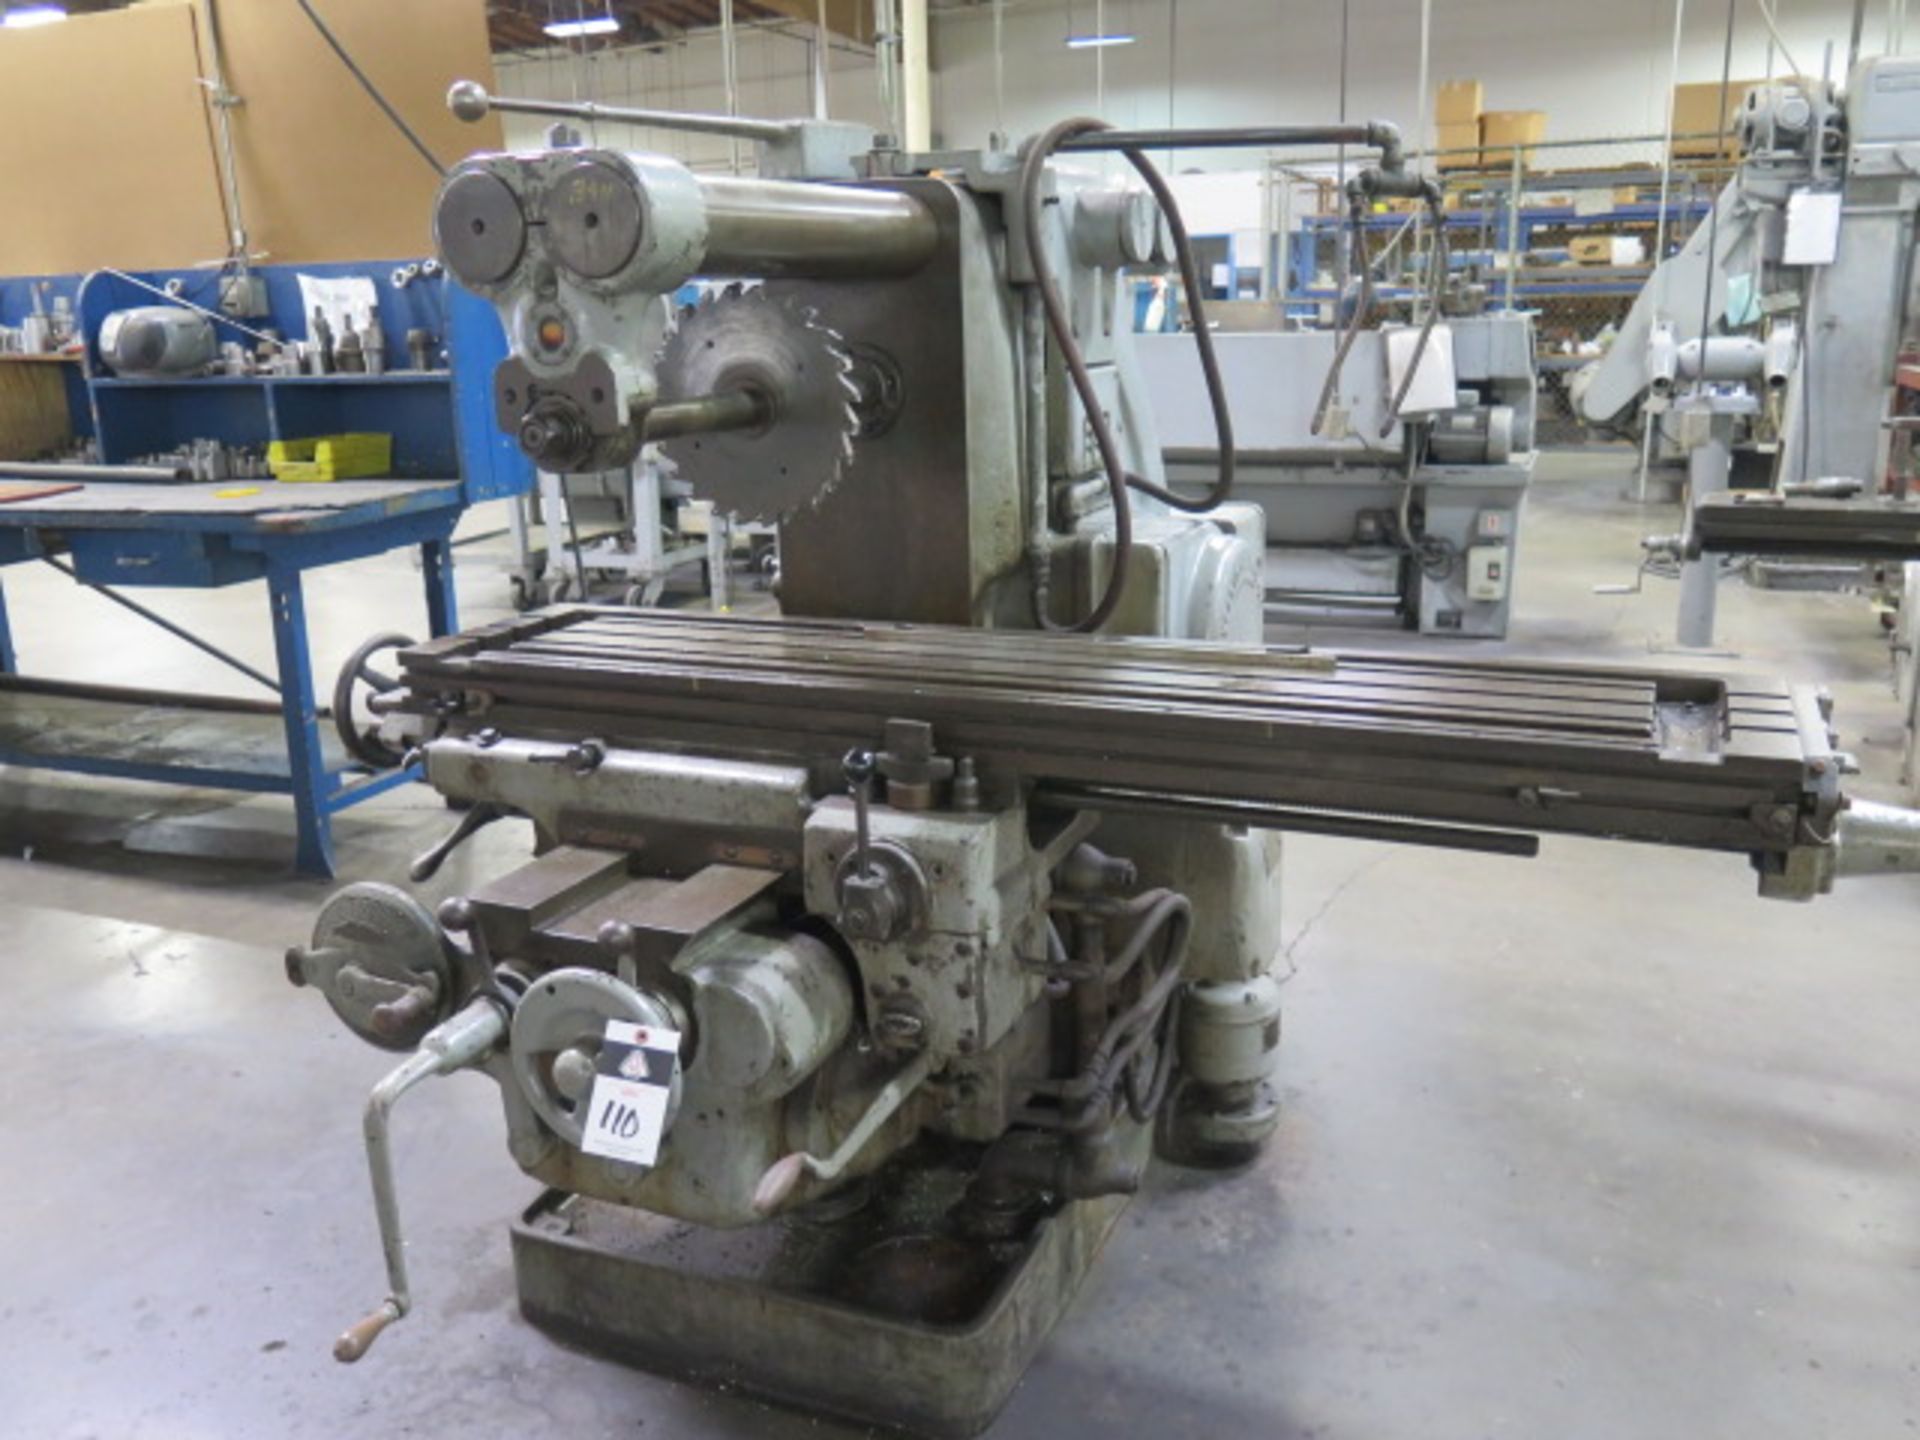 Kearney & Trecker Milwaukee Horizontal Mill s/n 27-7136 w/ 15-1500 RPM, 50-Taper Spindle, SOLD AS IS